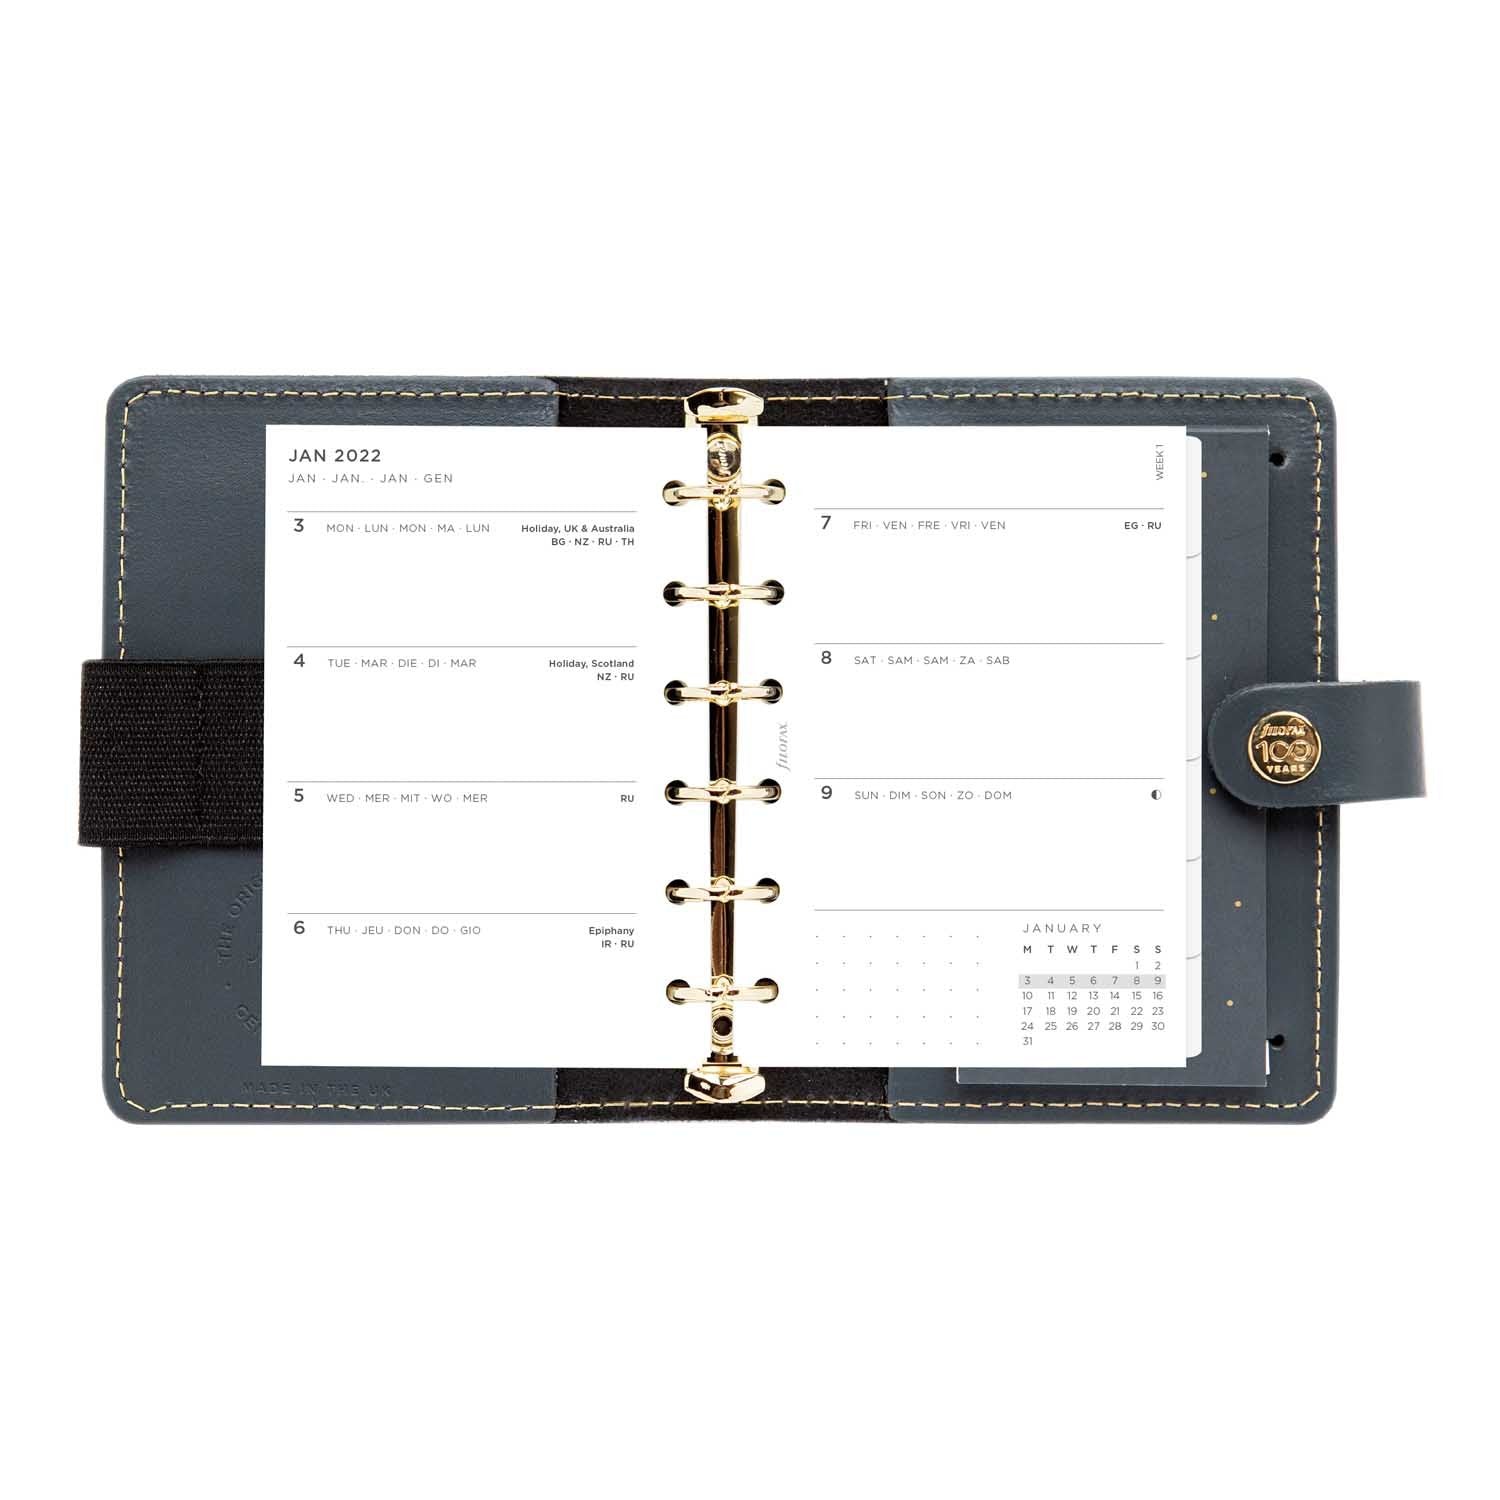 Filofax Centennial Limited Edition The Original Pocket Leather Organizer Charcoal Fully Open